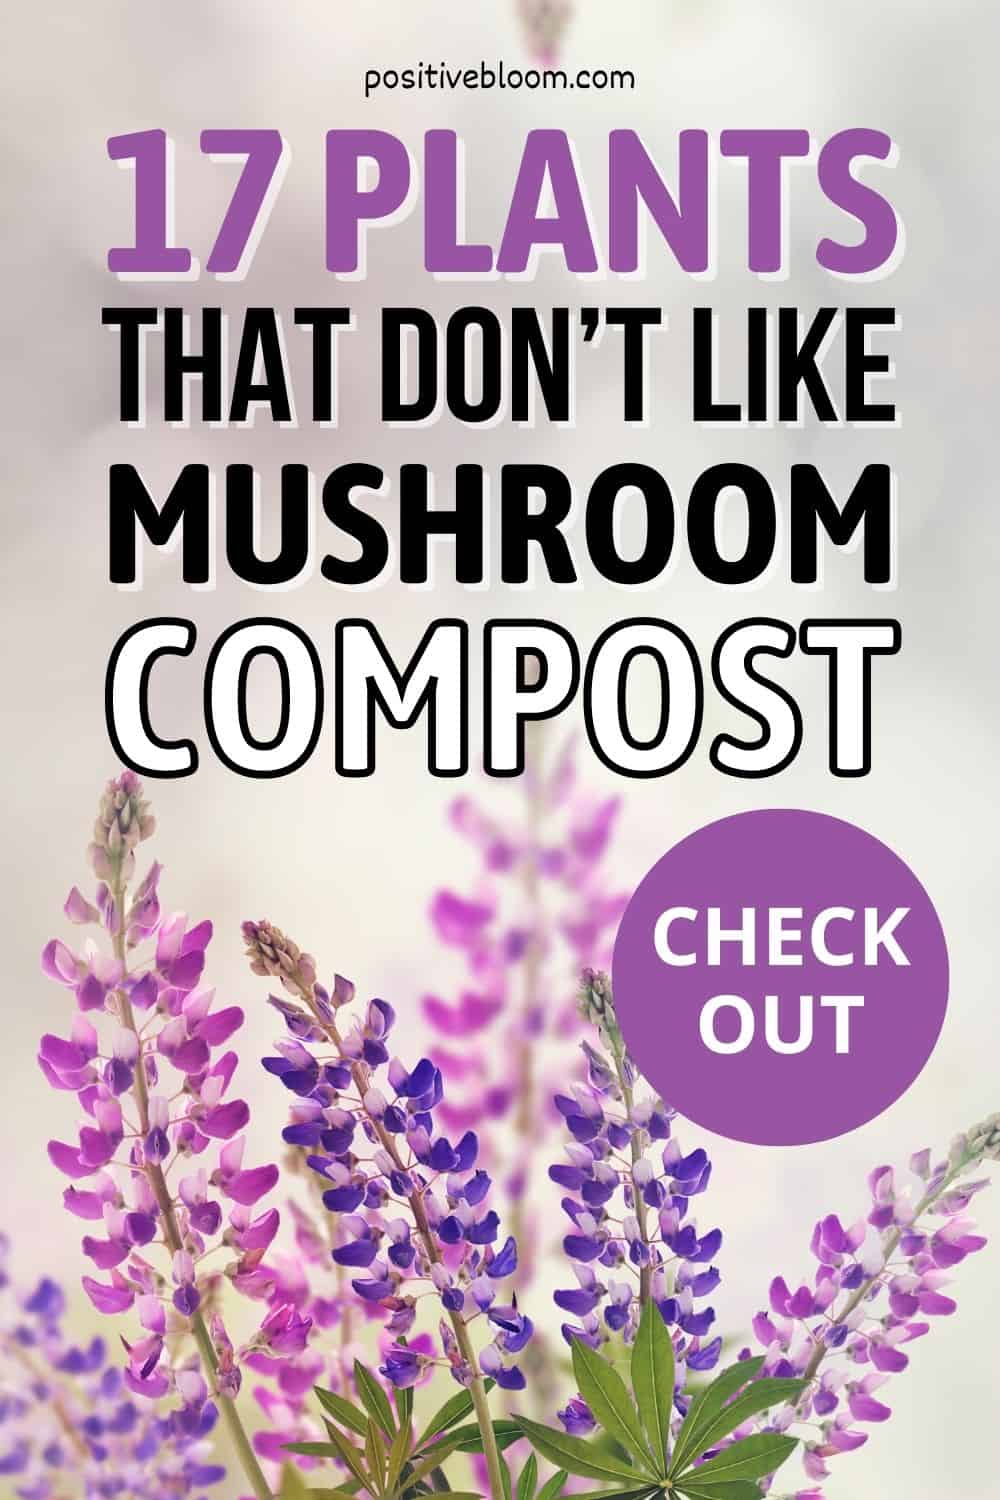 Check Out 17 Plants That Don’t Like Mushroom Compost Pinterest